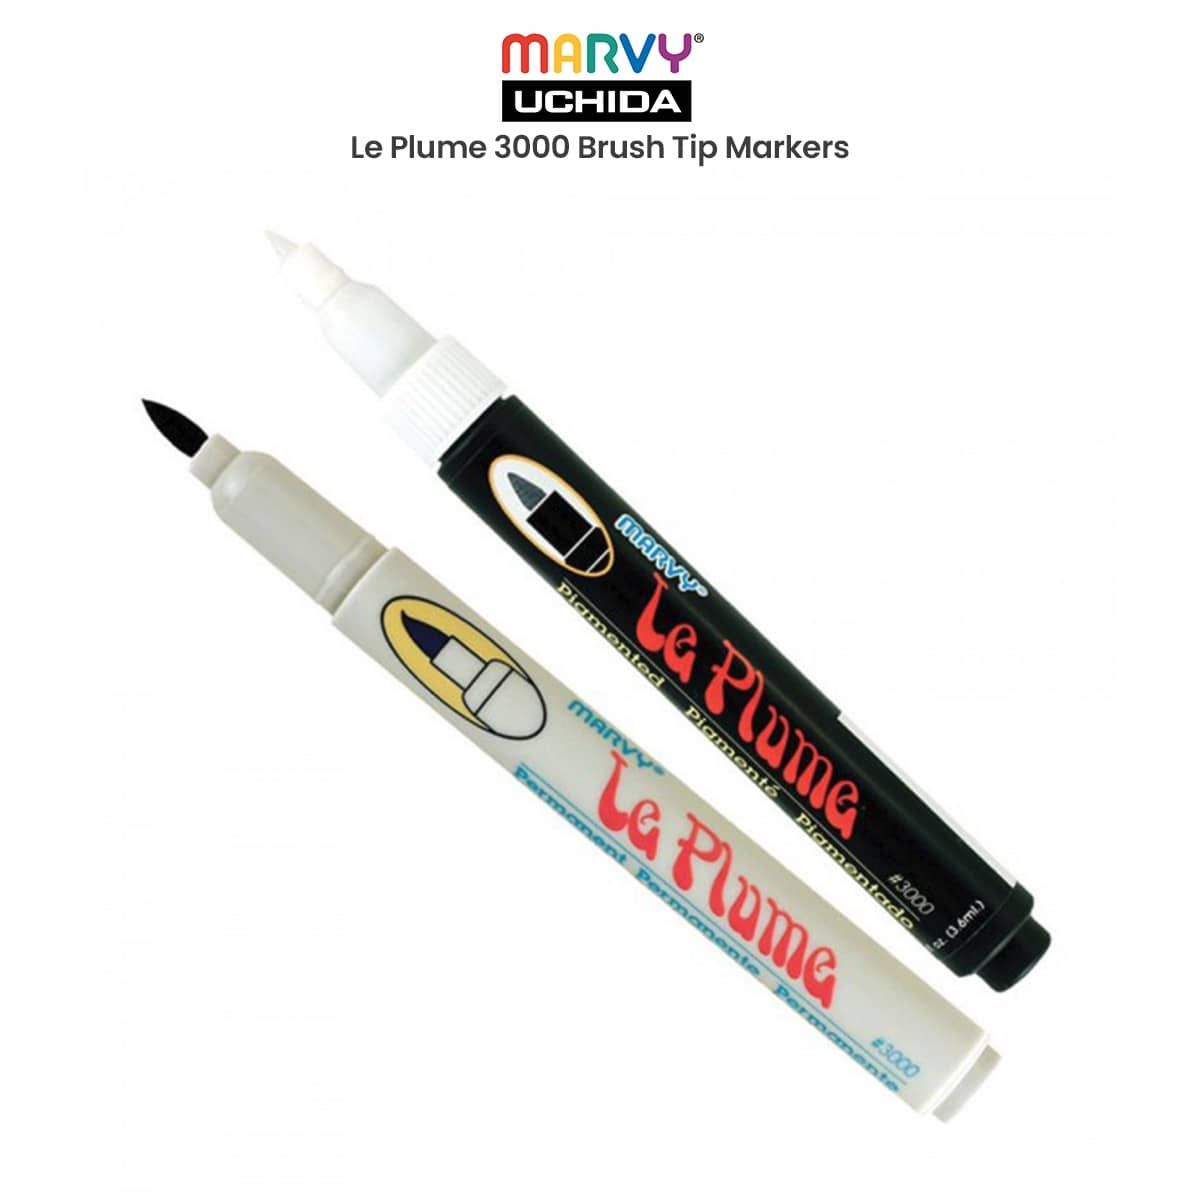 Le Plume 3000 Brush Tip Markers